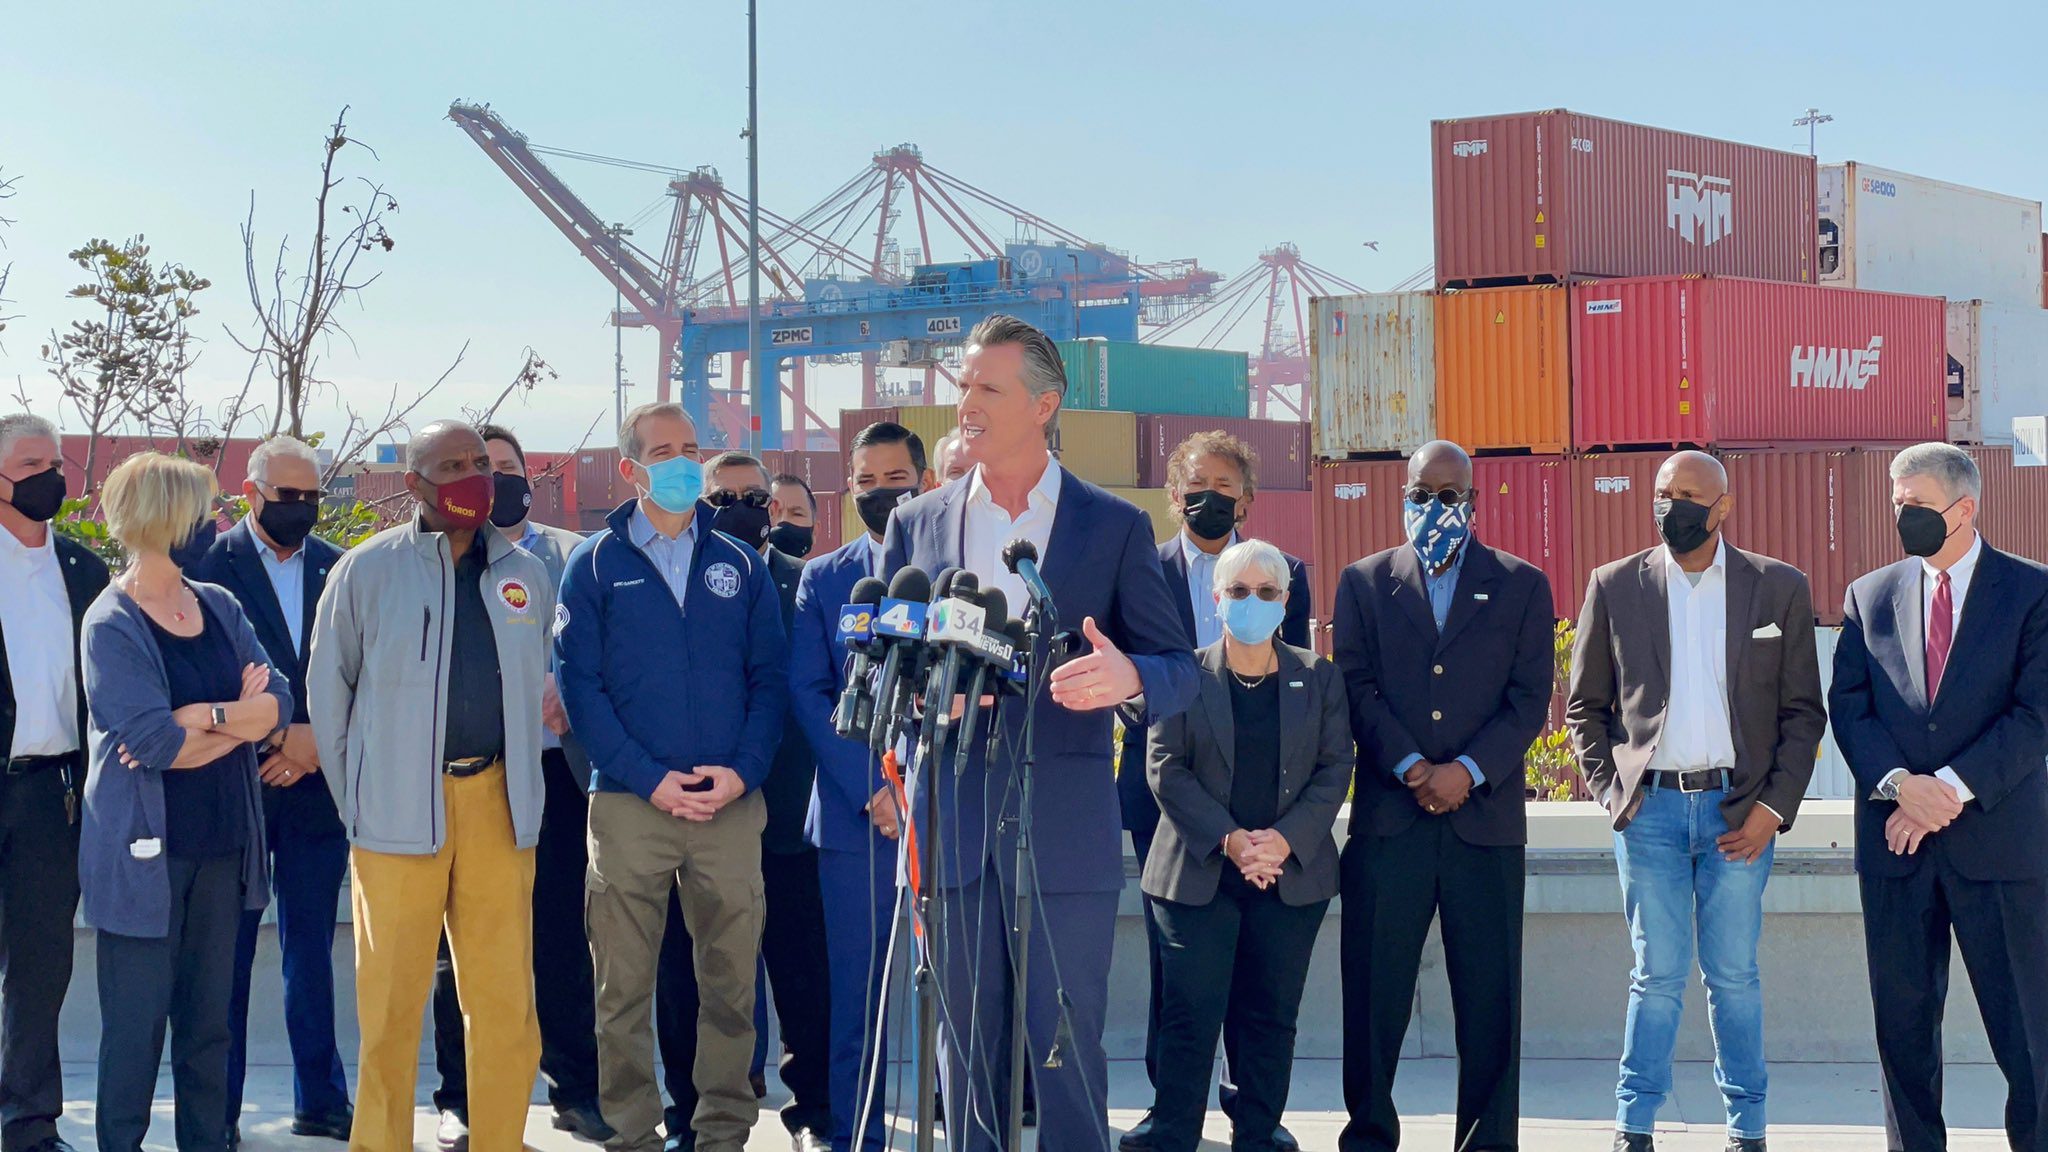 California State Budget Proposal Includes $2.3 Billion for Ports